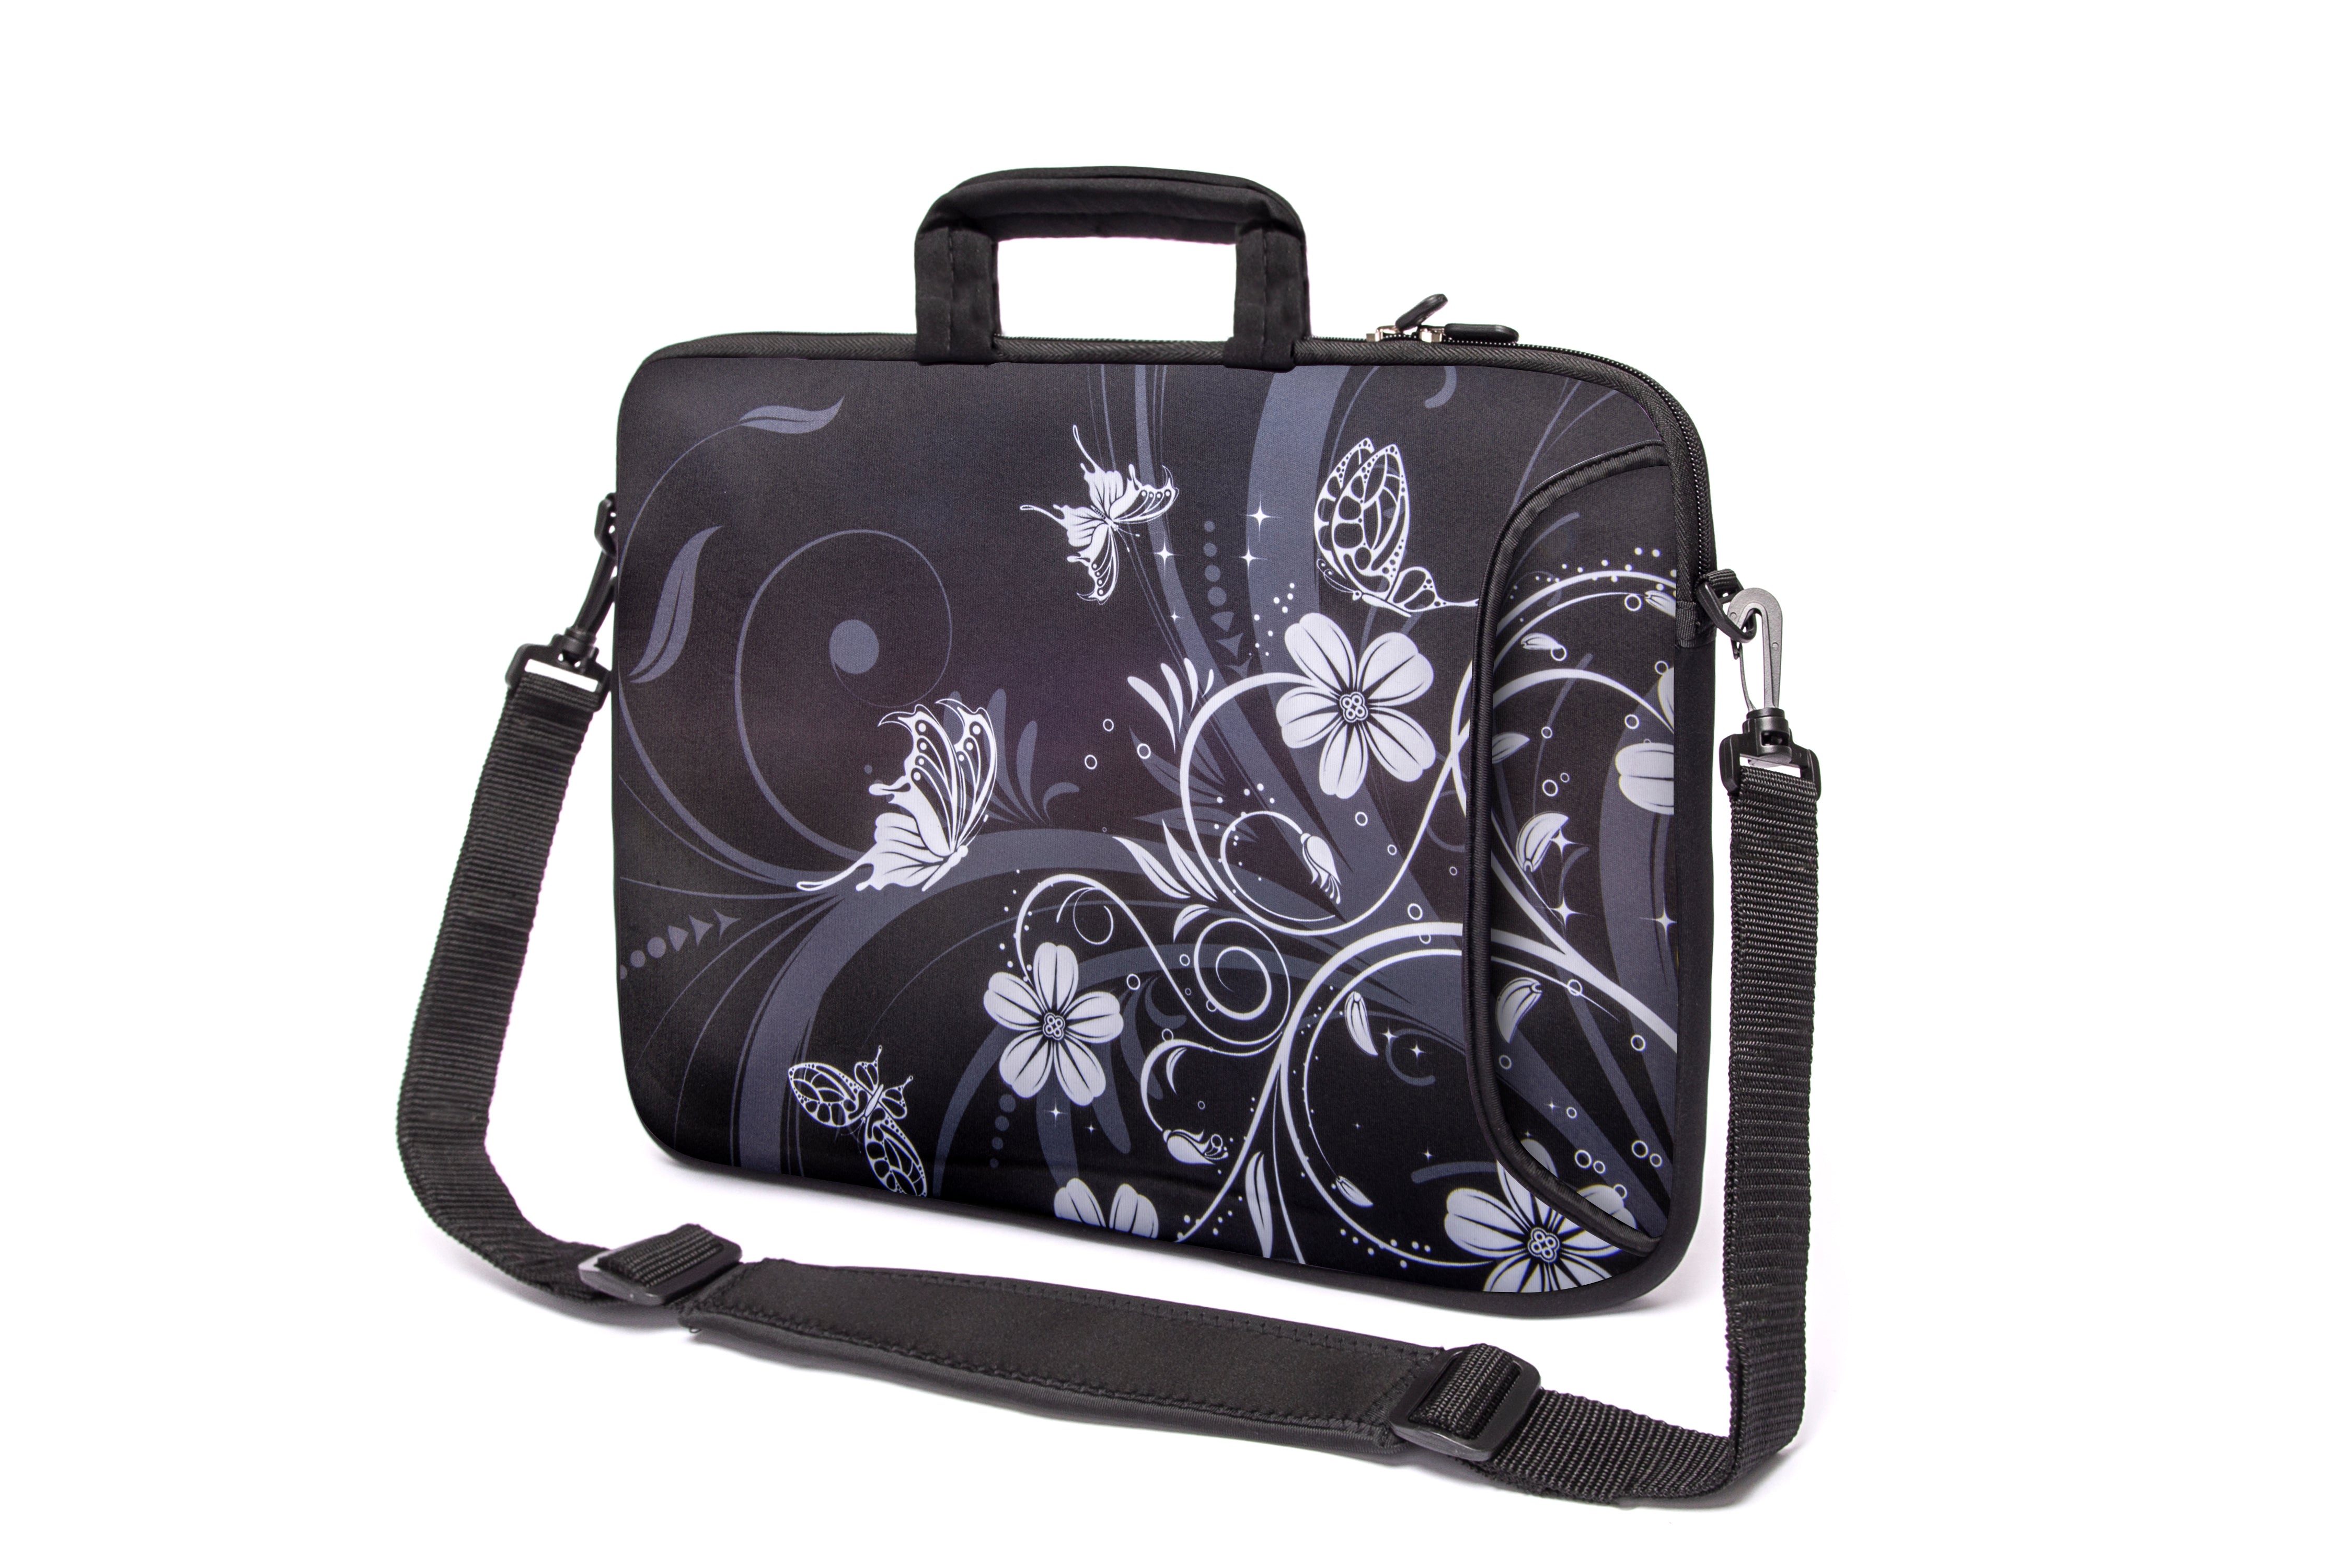 17"- 17.3" (inch) LAPTOP BAG/CASE WITH HANDLE & STRAP, NEOPRENE MADE FOR LAPTOPS/NOTEBOOKS, ZIPPED*BLACK 4 BUTTERFLIES*